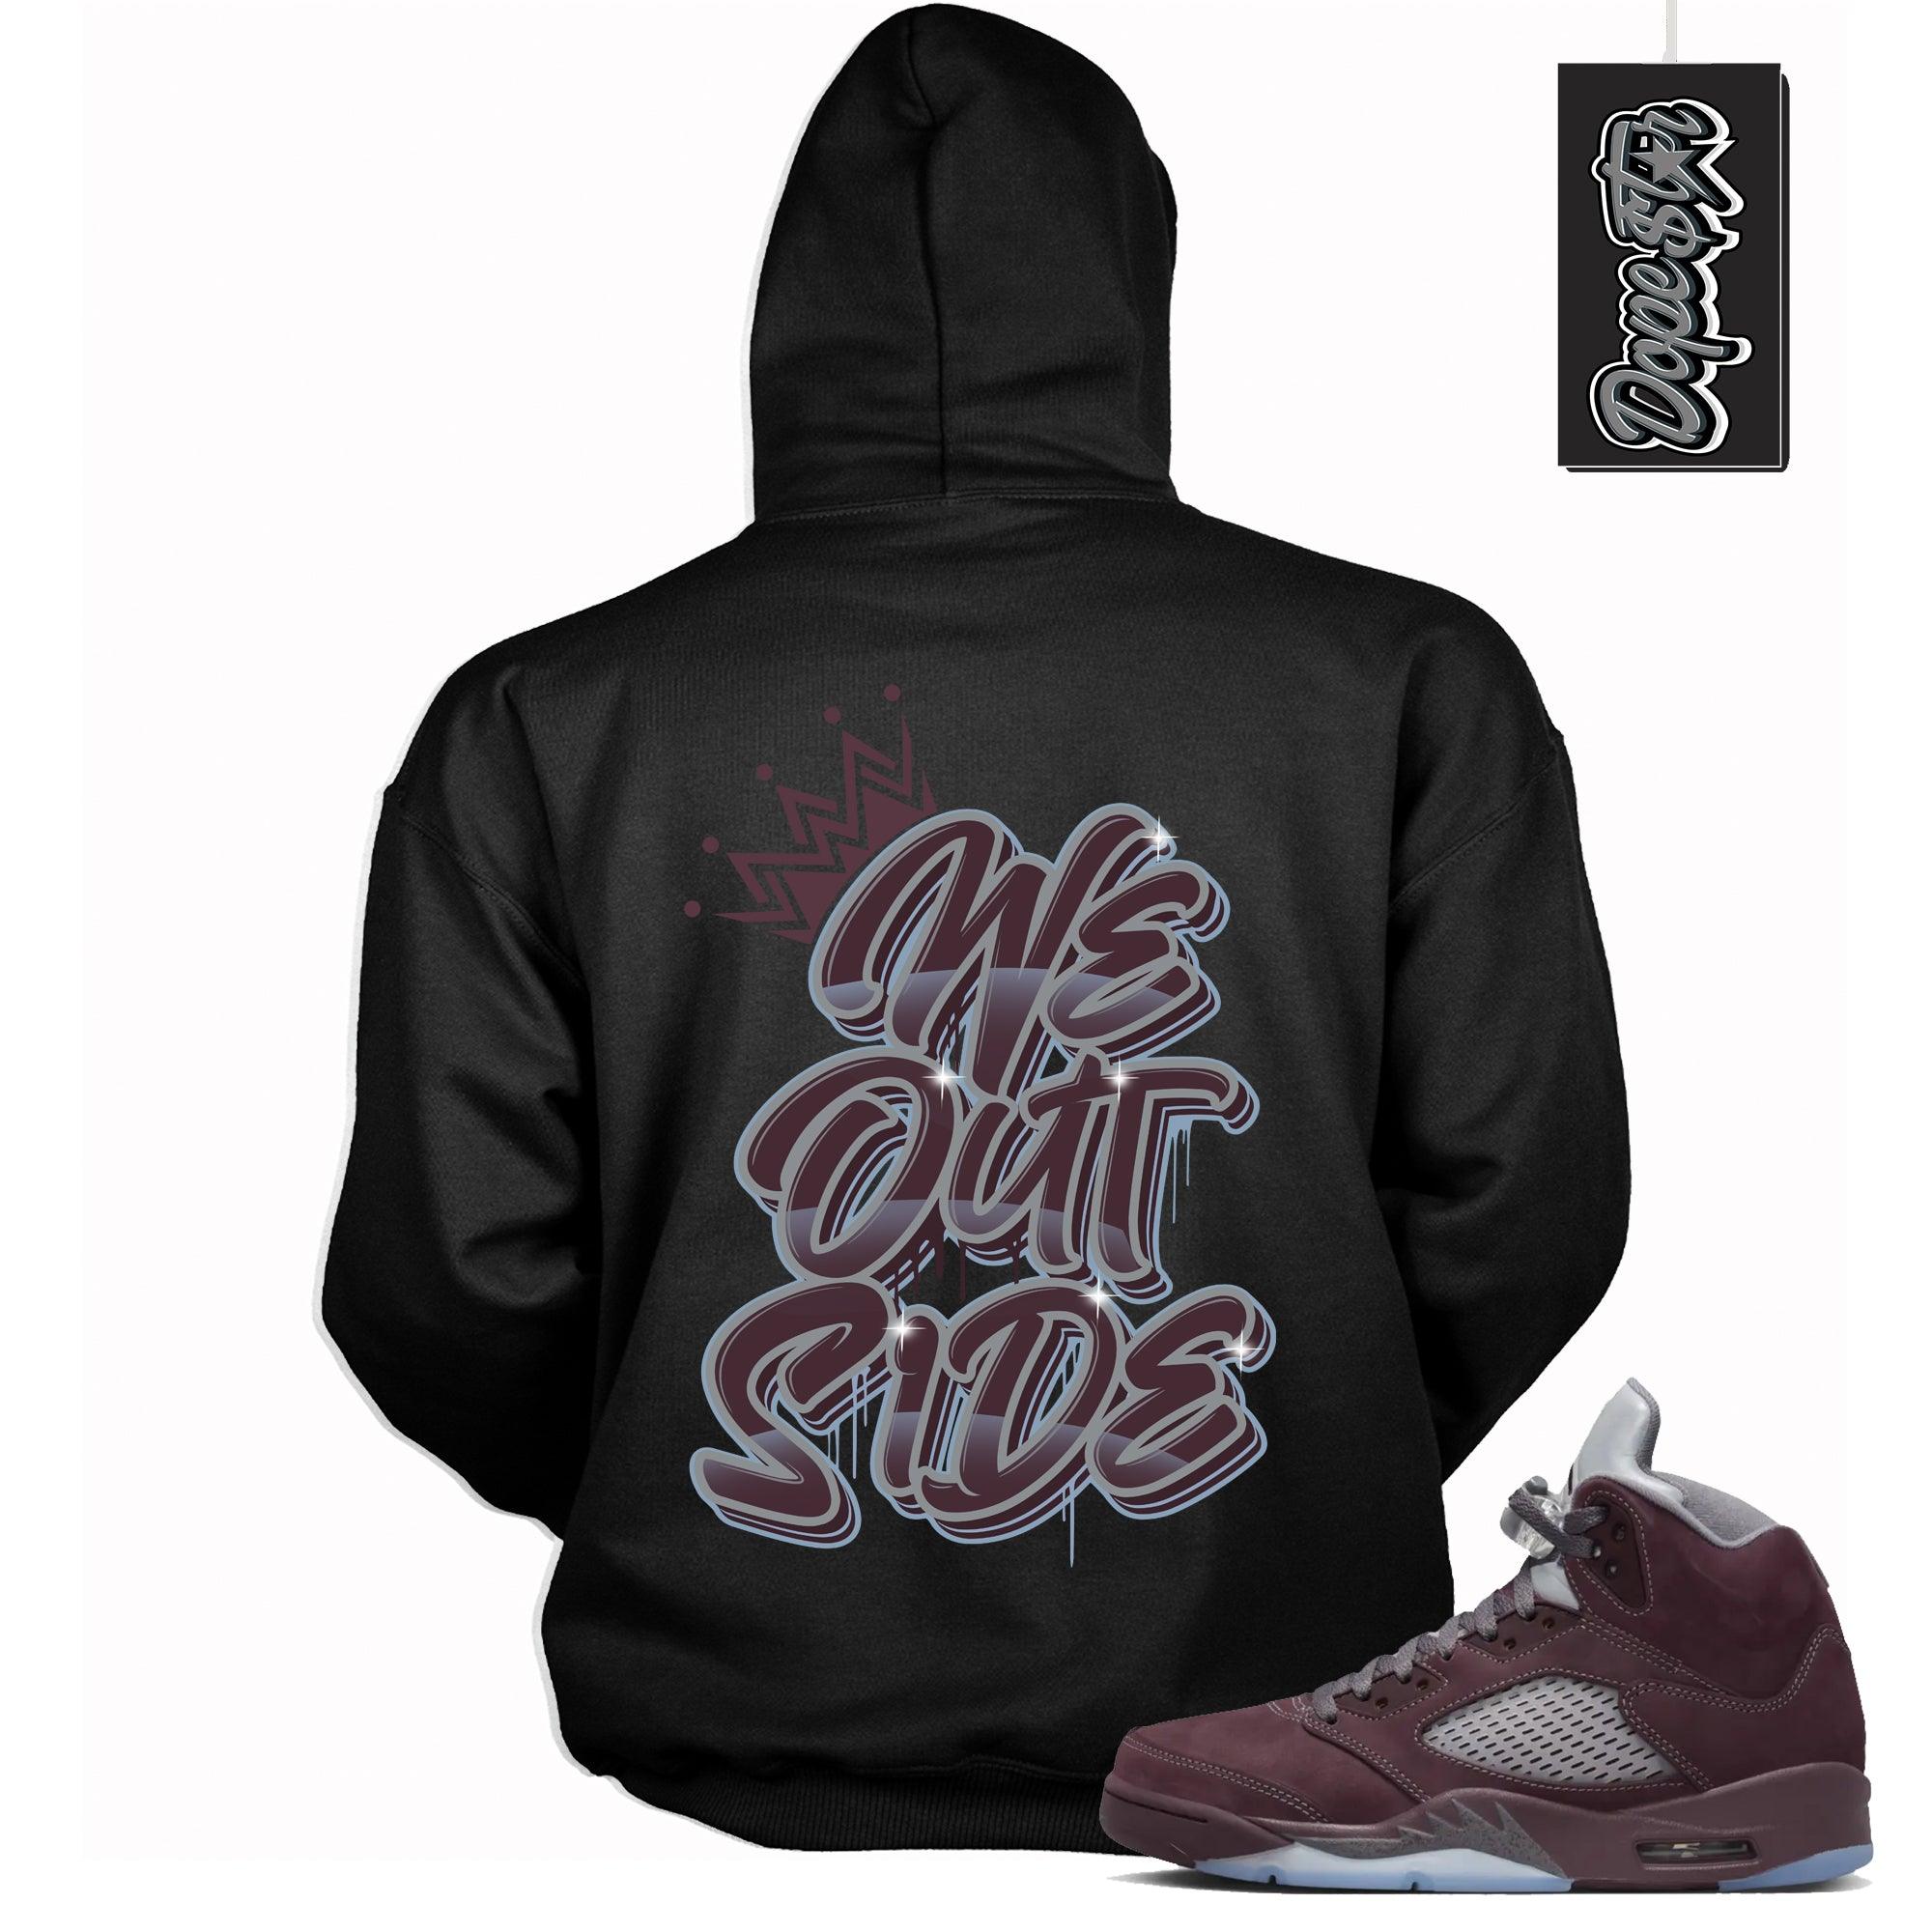 Cool Black Graphic Hoodie with “ We Outside  “ print, that perfectly matches Air Jordan 5 Burgundy 2023 sneakers